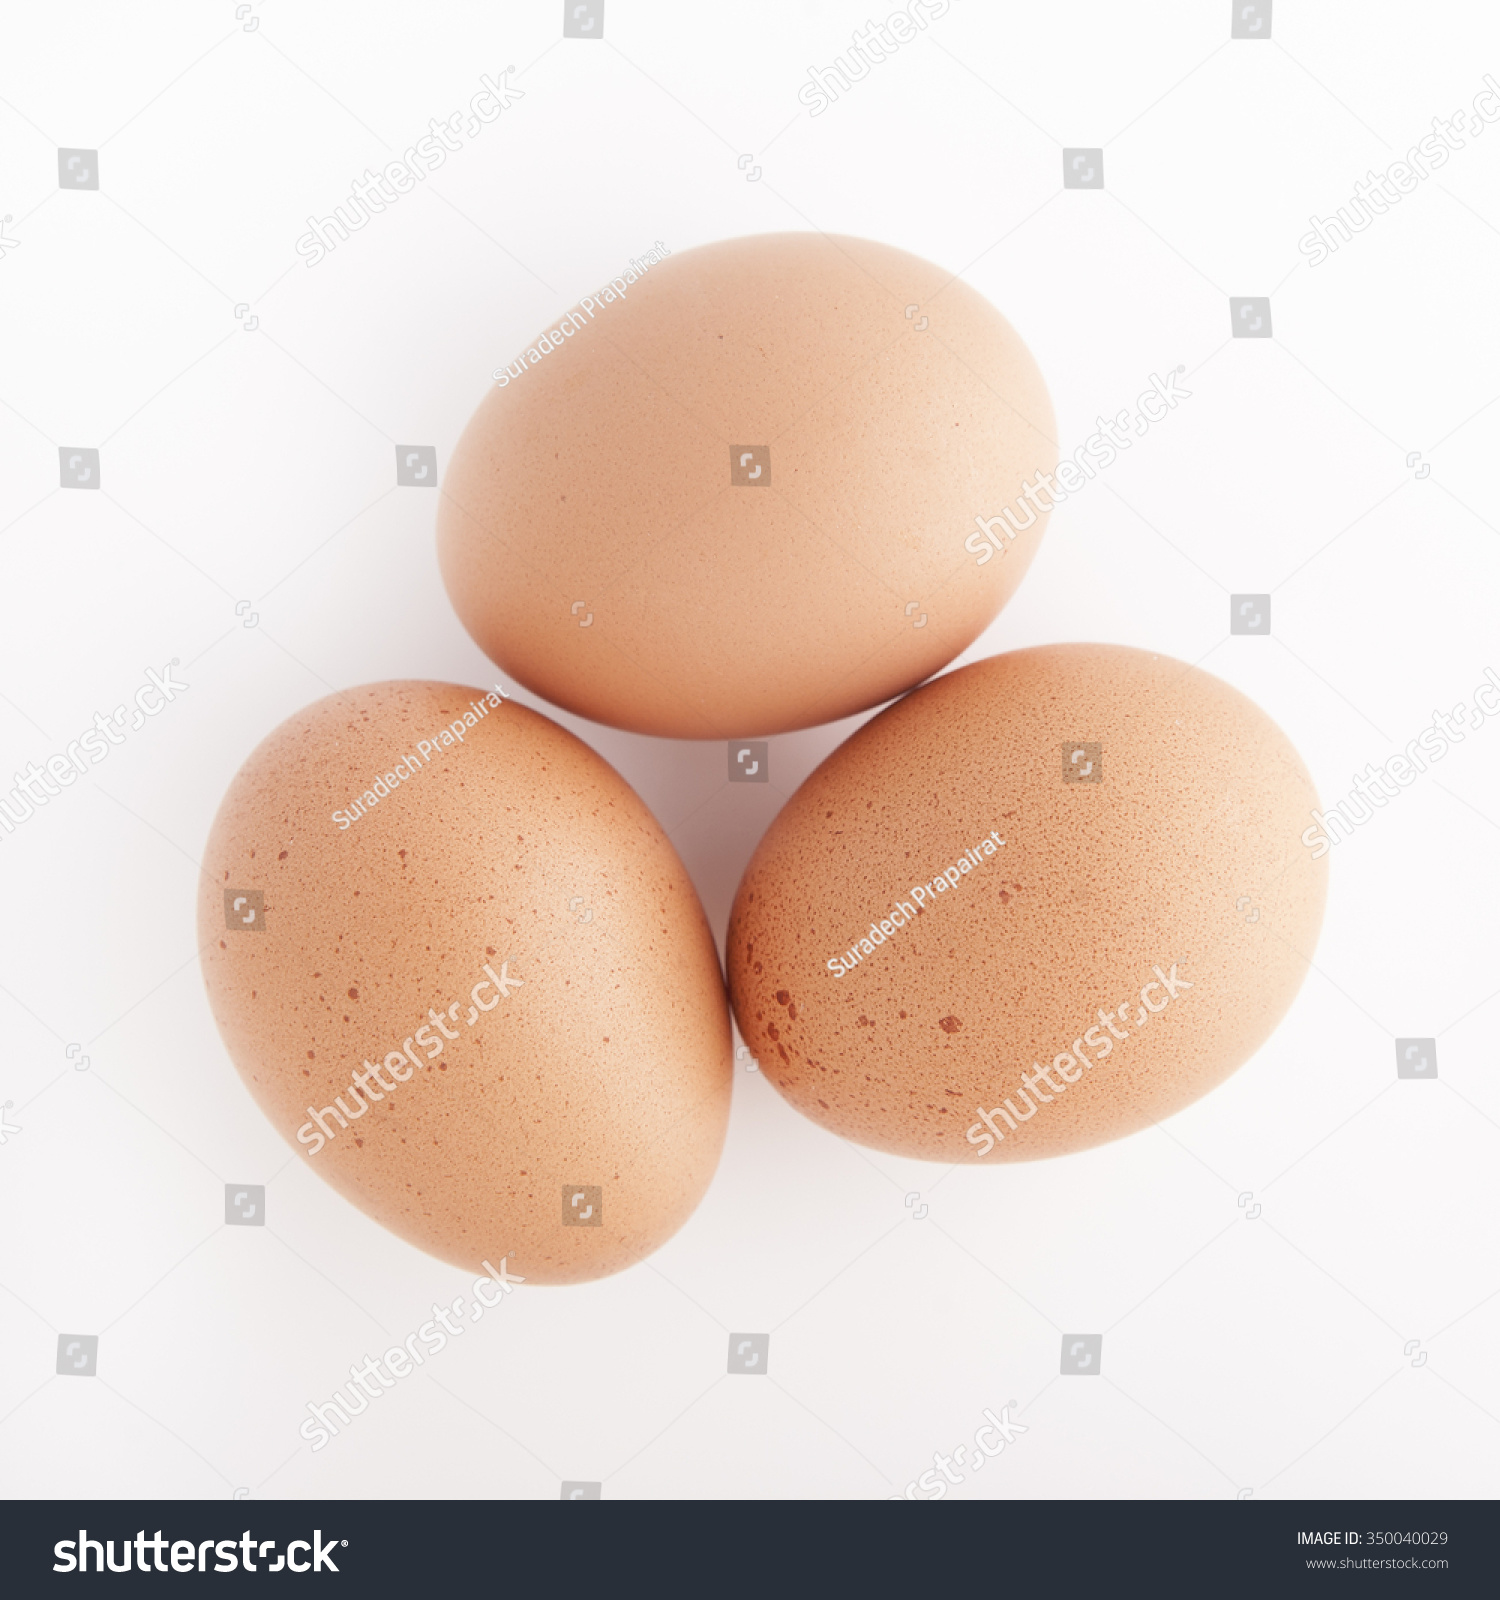 Three Eggs Isolated On White Background Stock Photo (Download Now ...